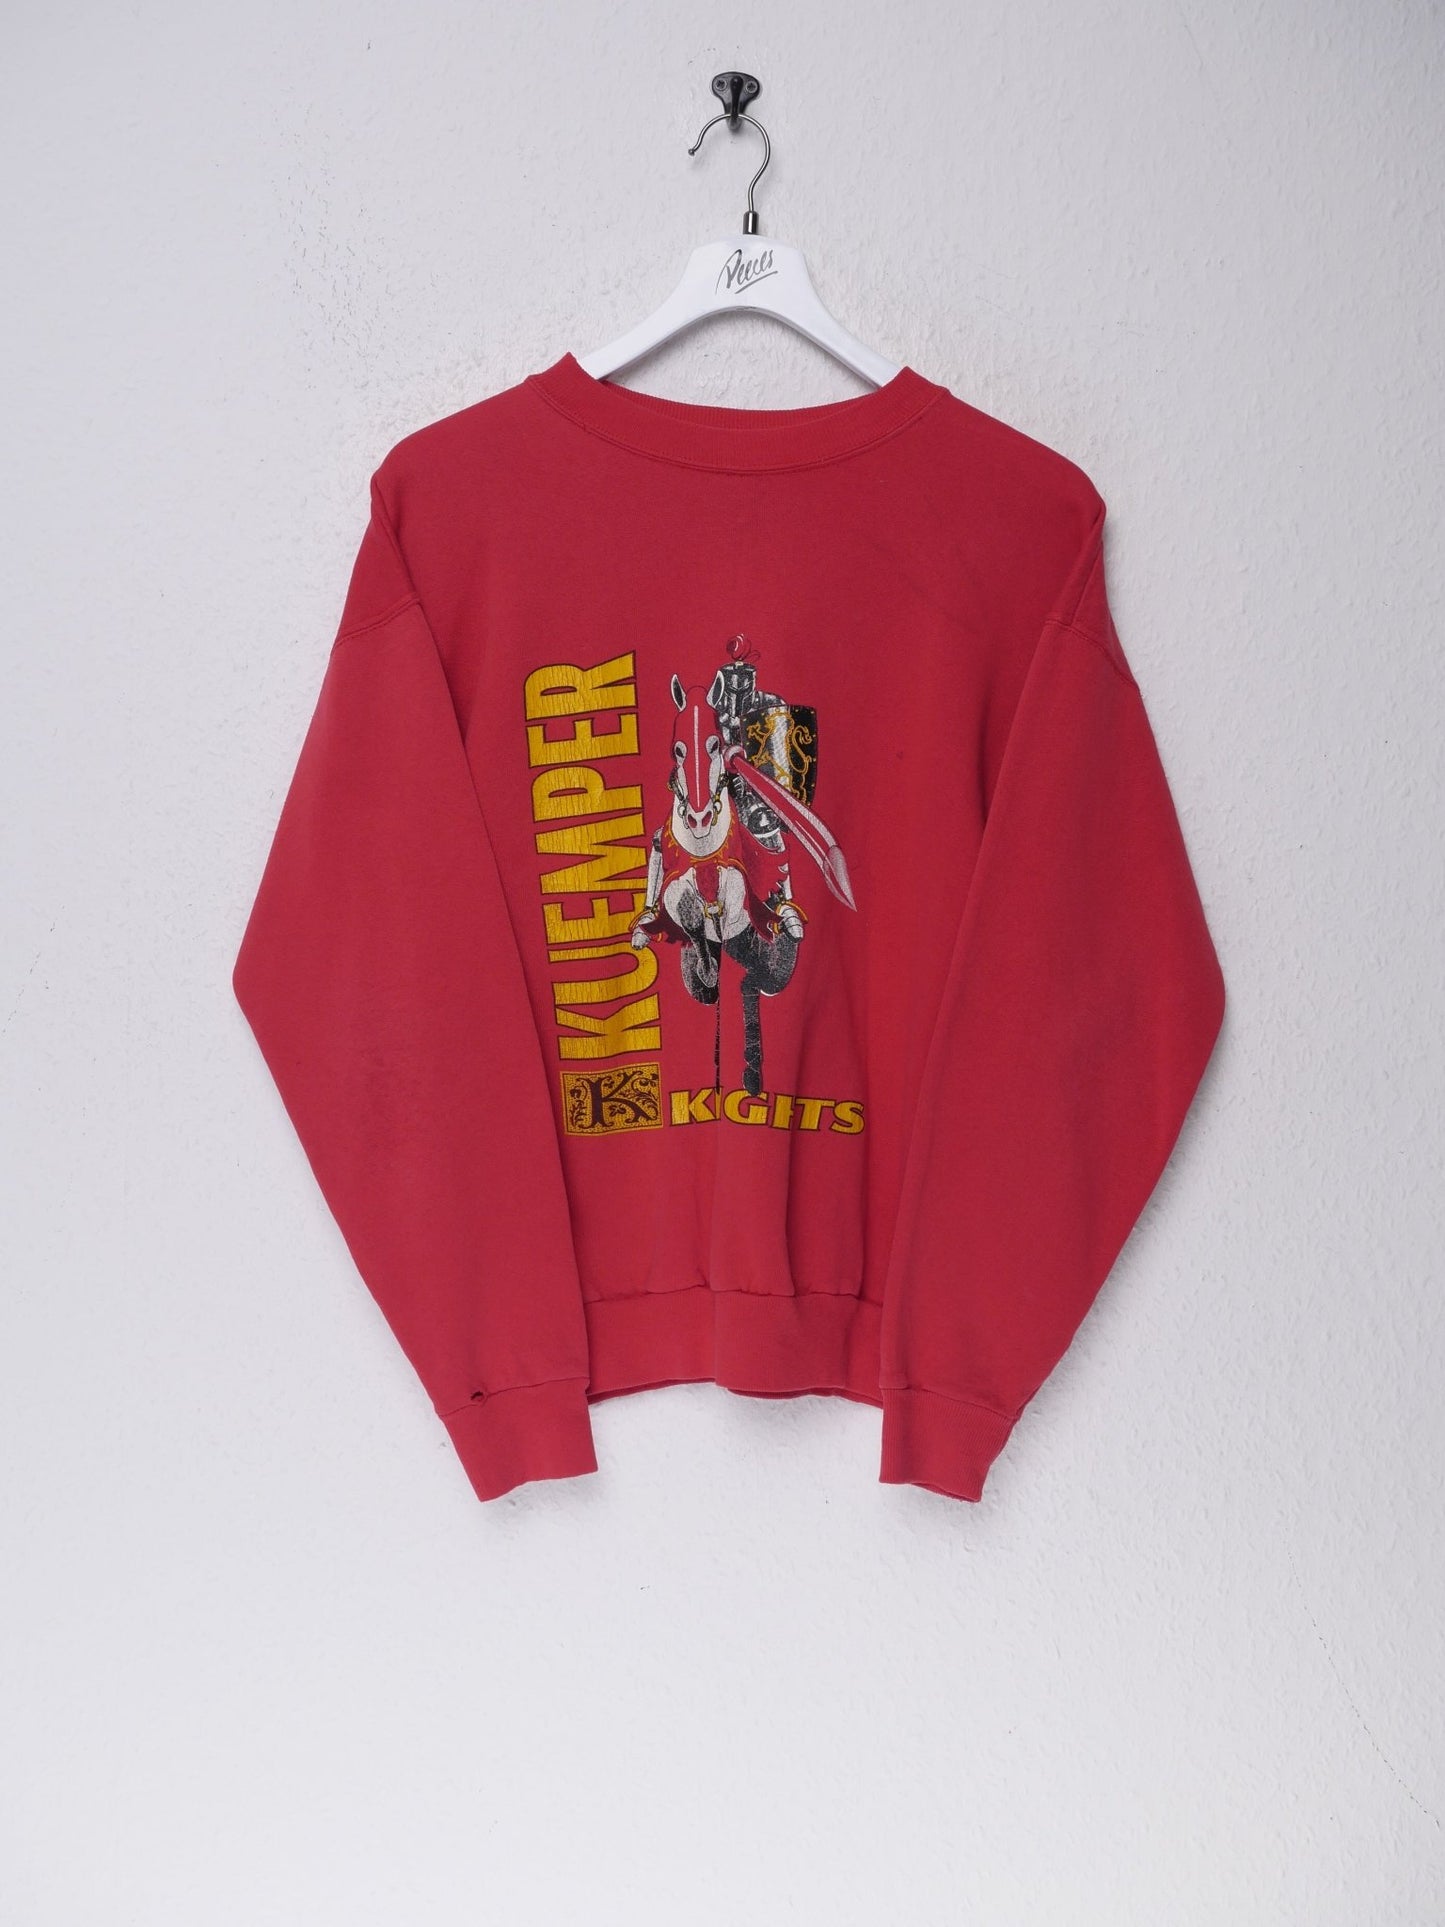 Vintage Kuemper Knights red Graphic Sweater - Peeces